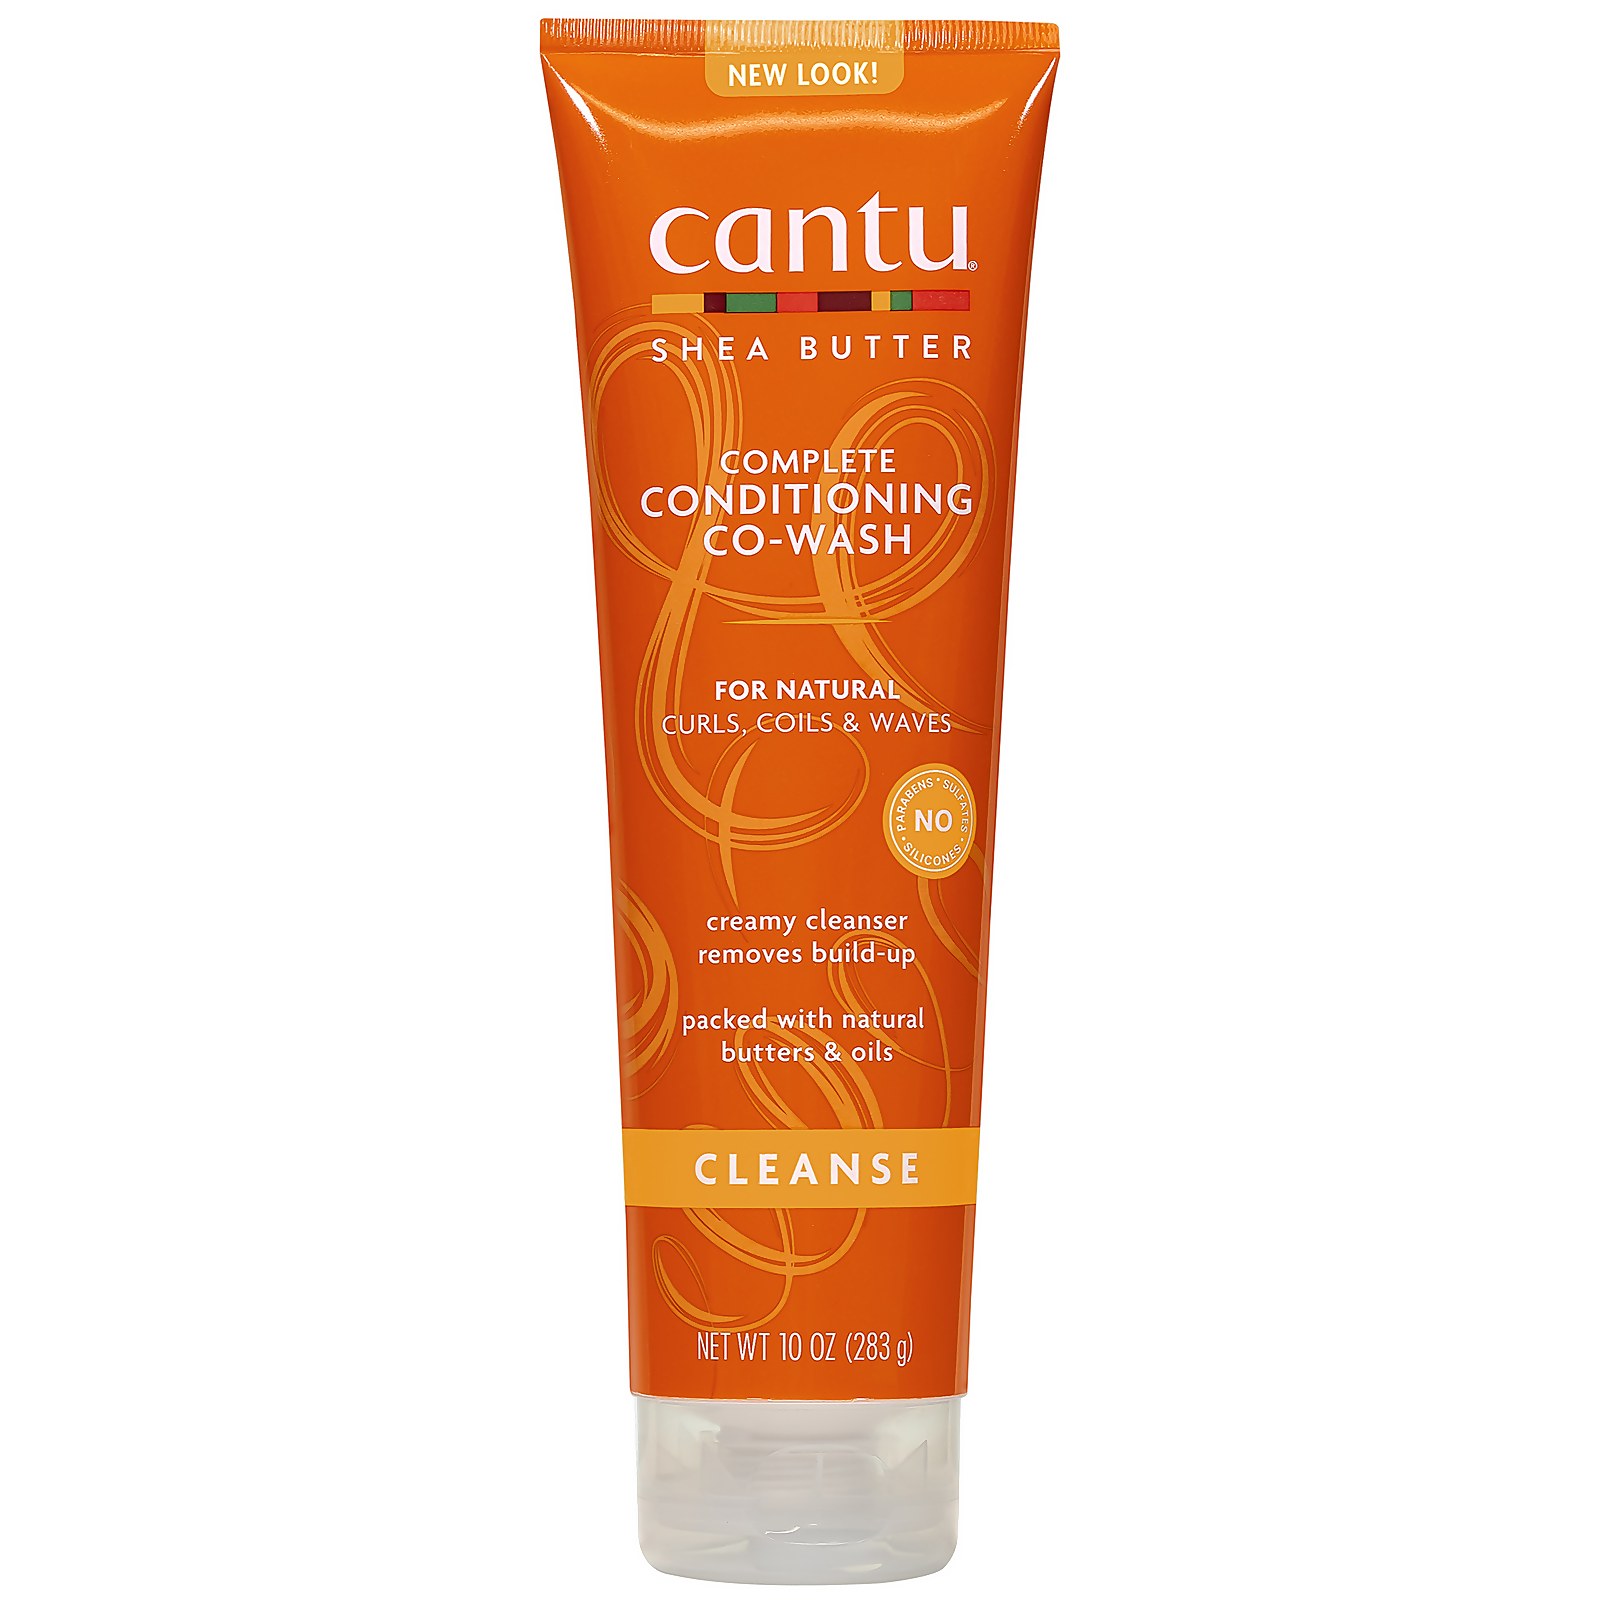 Cantu Shea Burro for Natural Hair Complete Conditioning Co-Wash